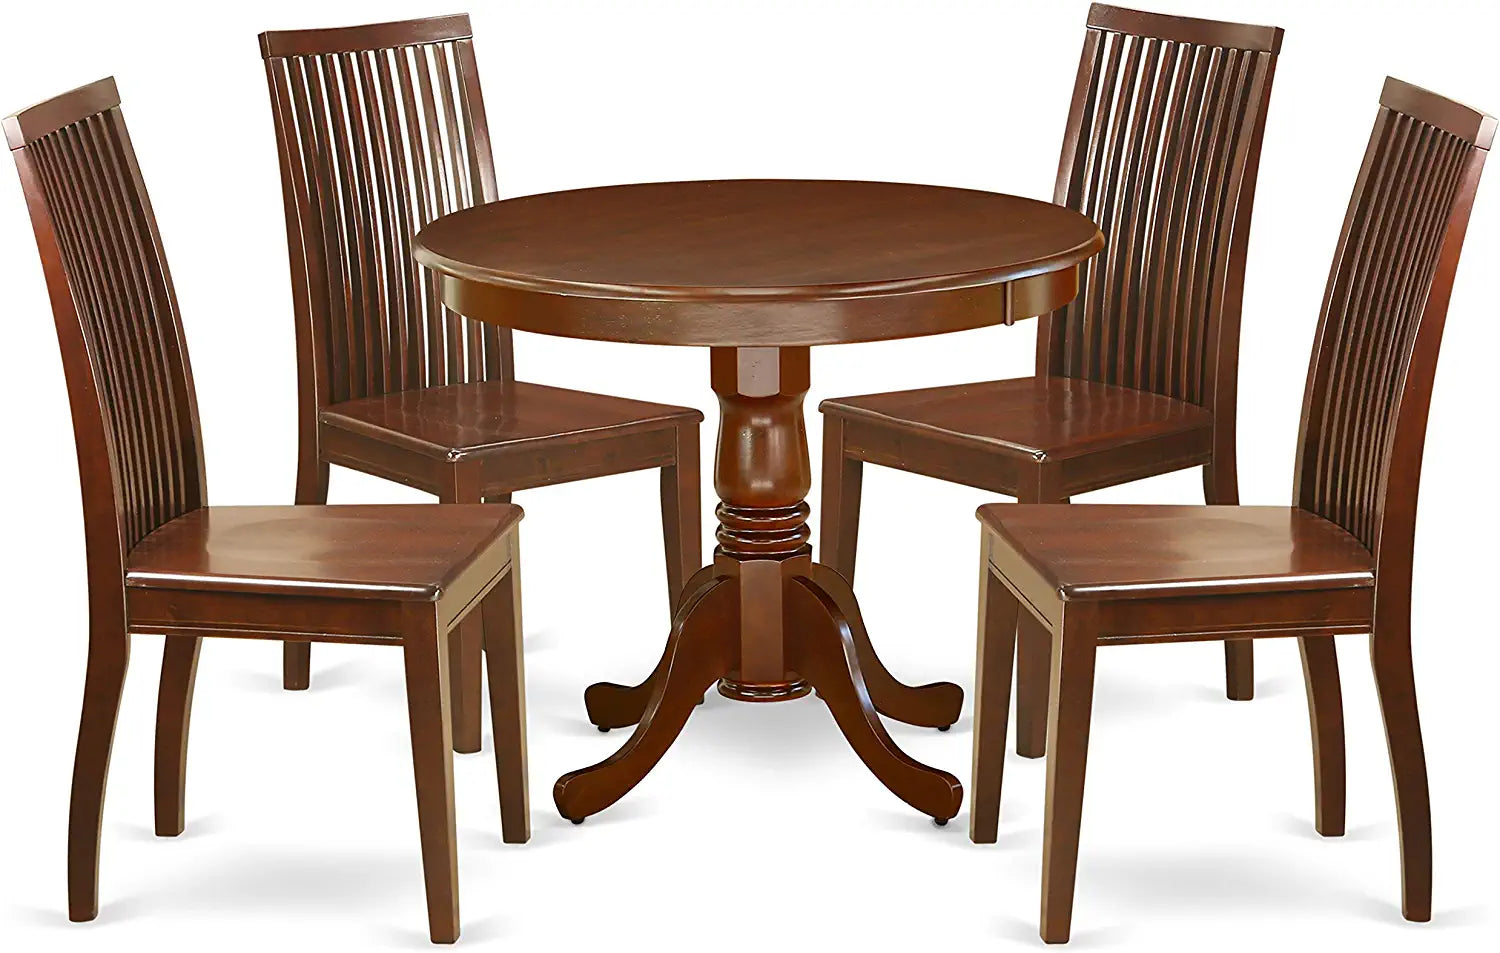 East West Furniture ANIP5-MAH-W Dining Room Table Set, 4 Chairs and 1